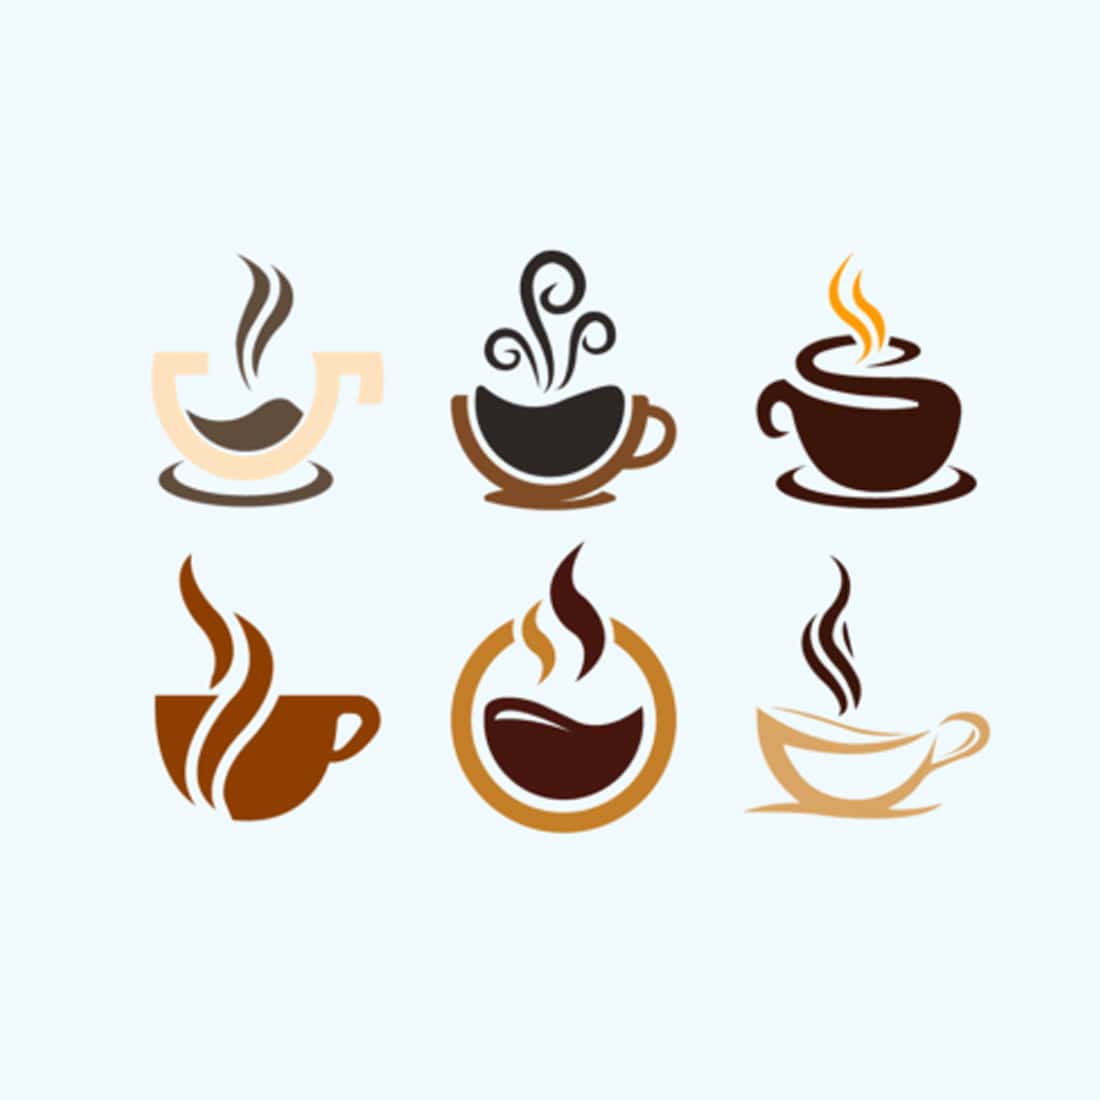 Cafe-Graphics bundle for your cafe logo cover image.